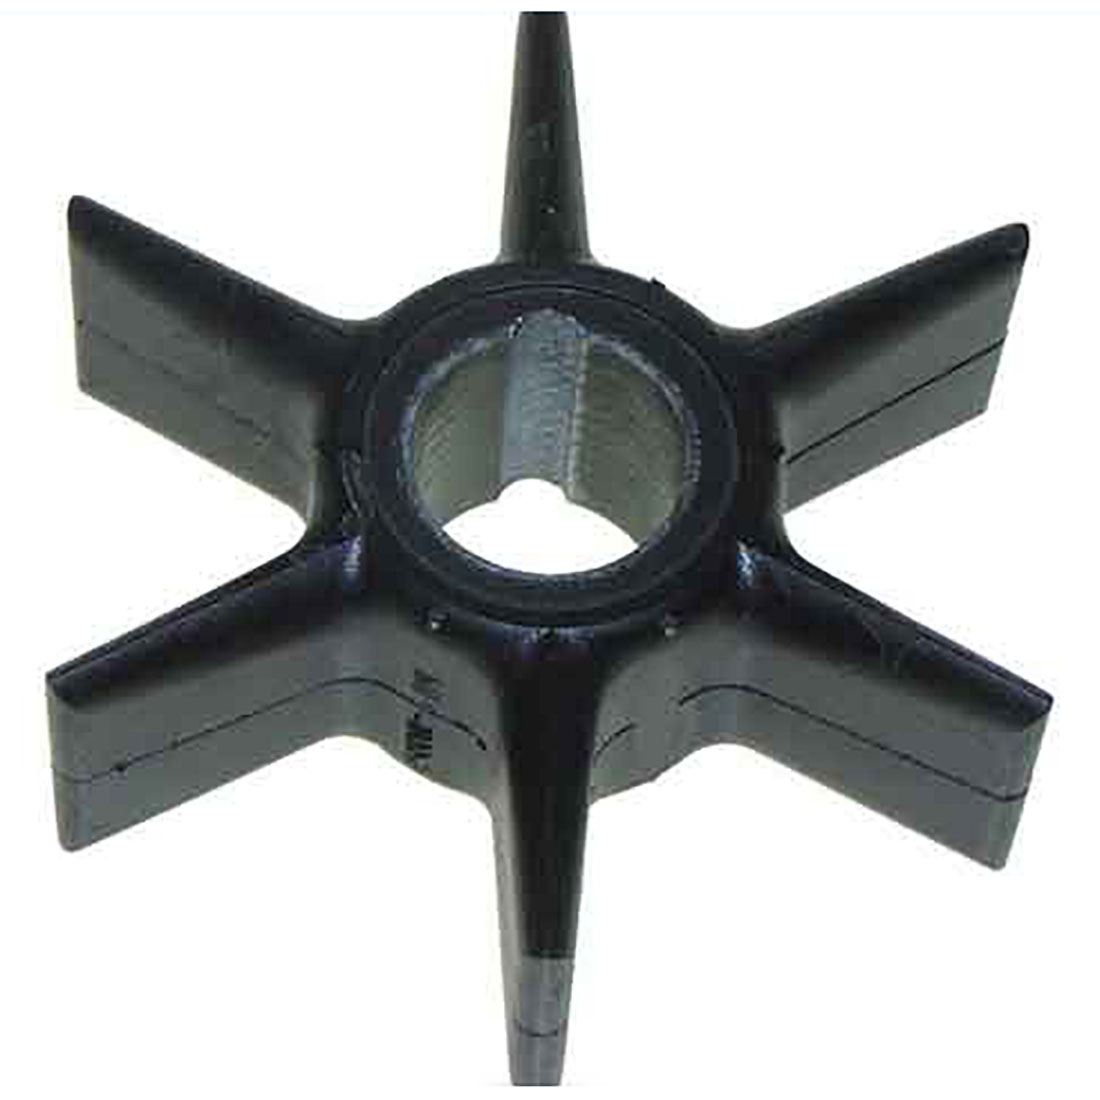 Impeller for Force 3-cyl, 70-75 Hp outboard water pumps